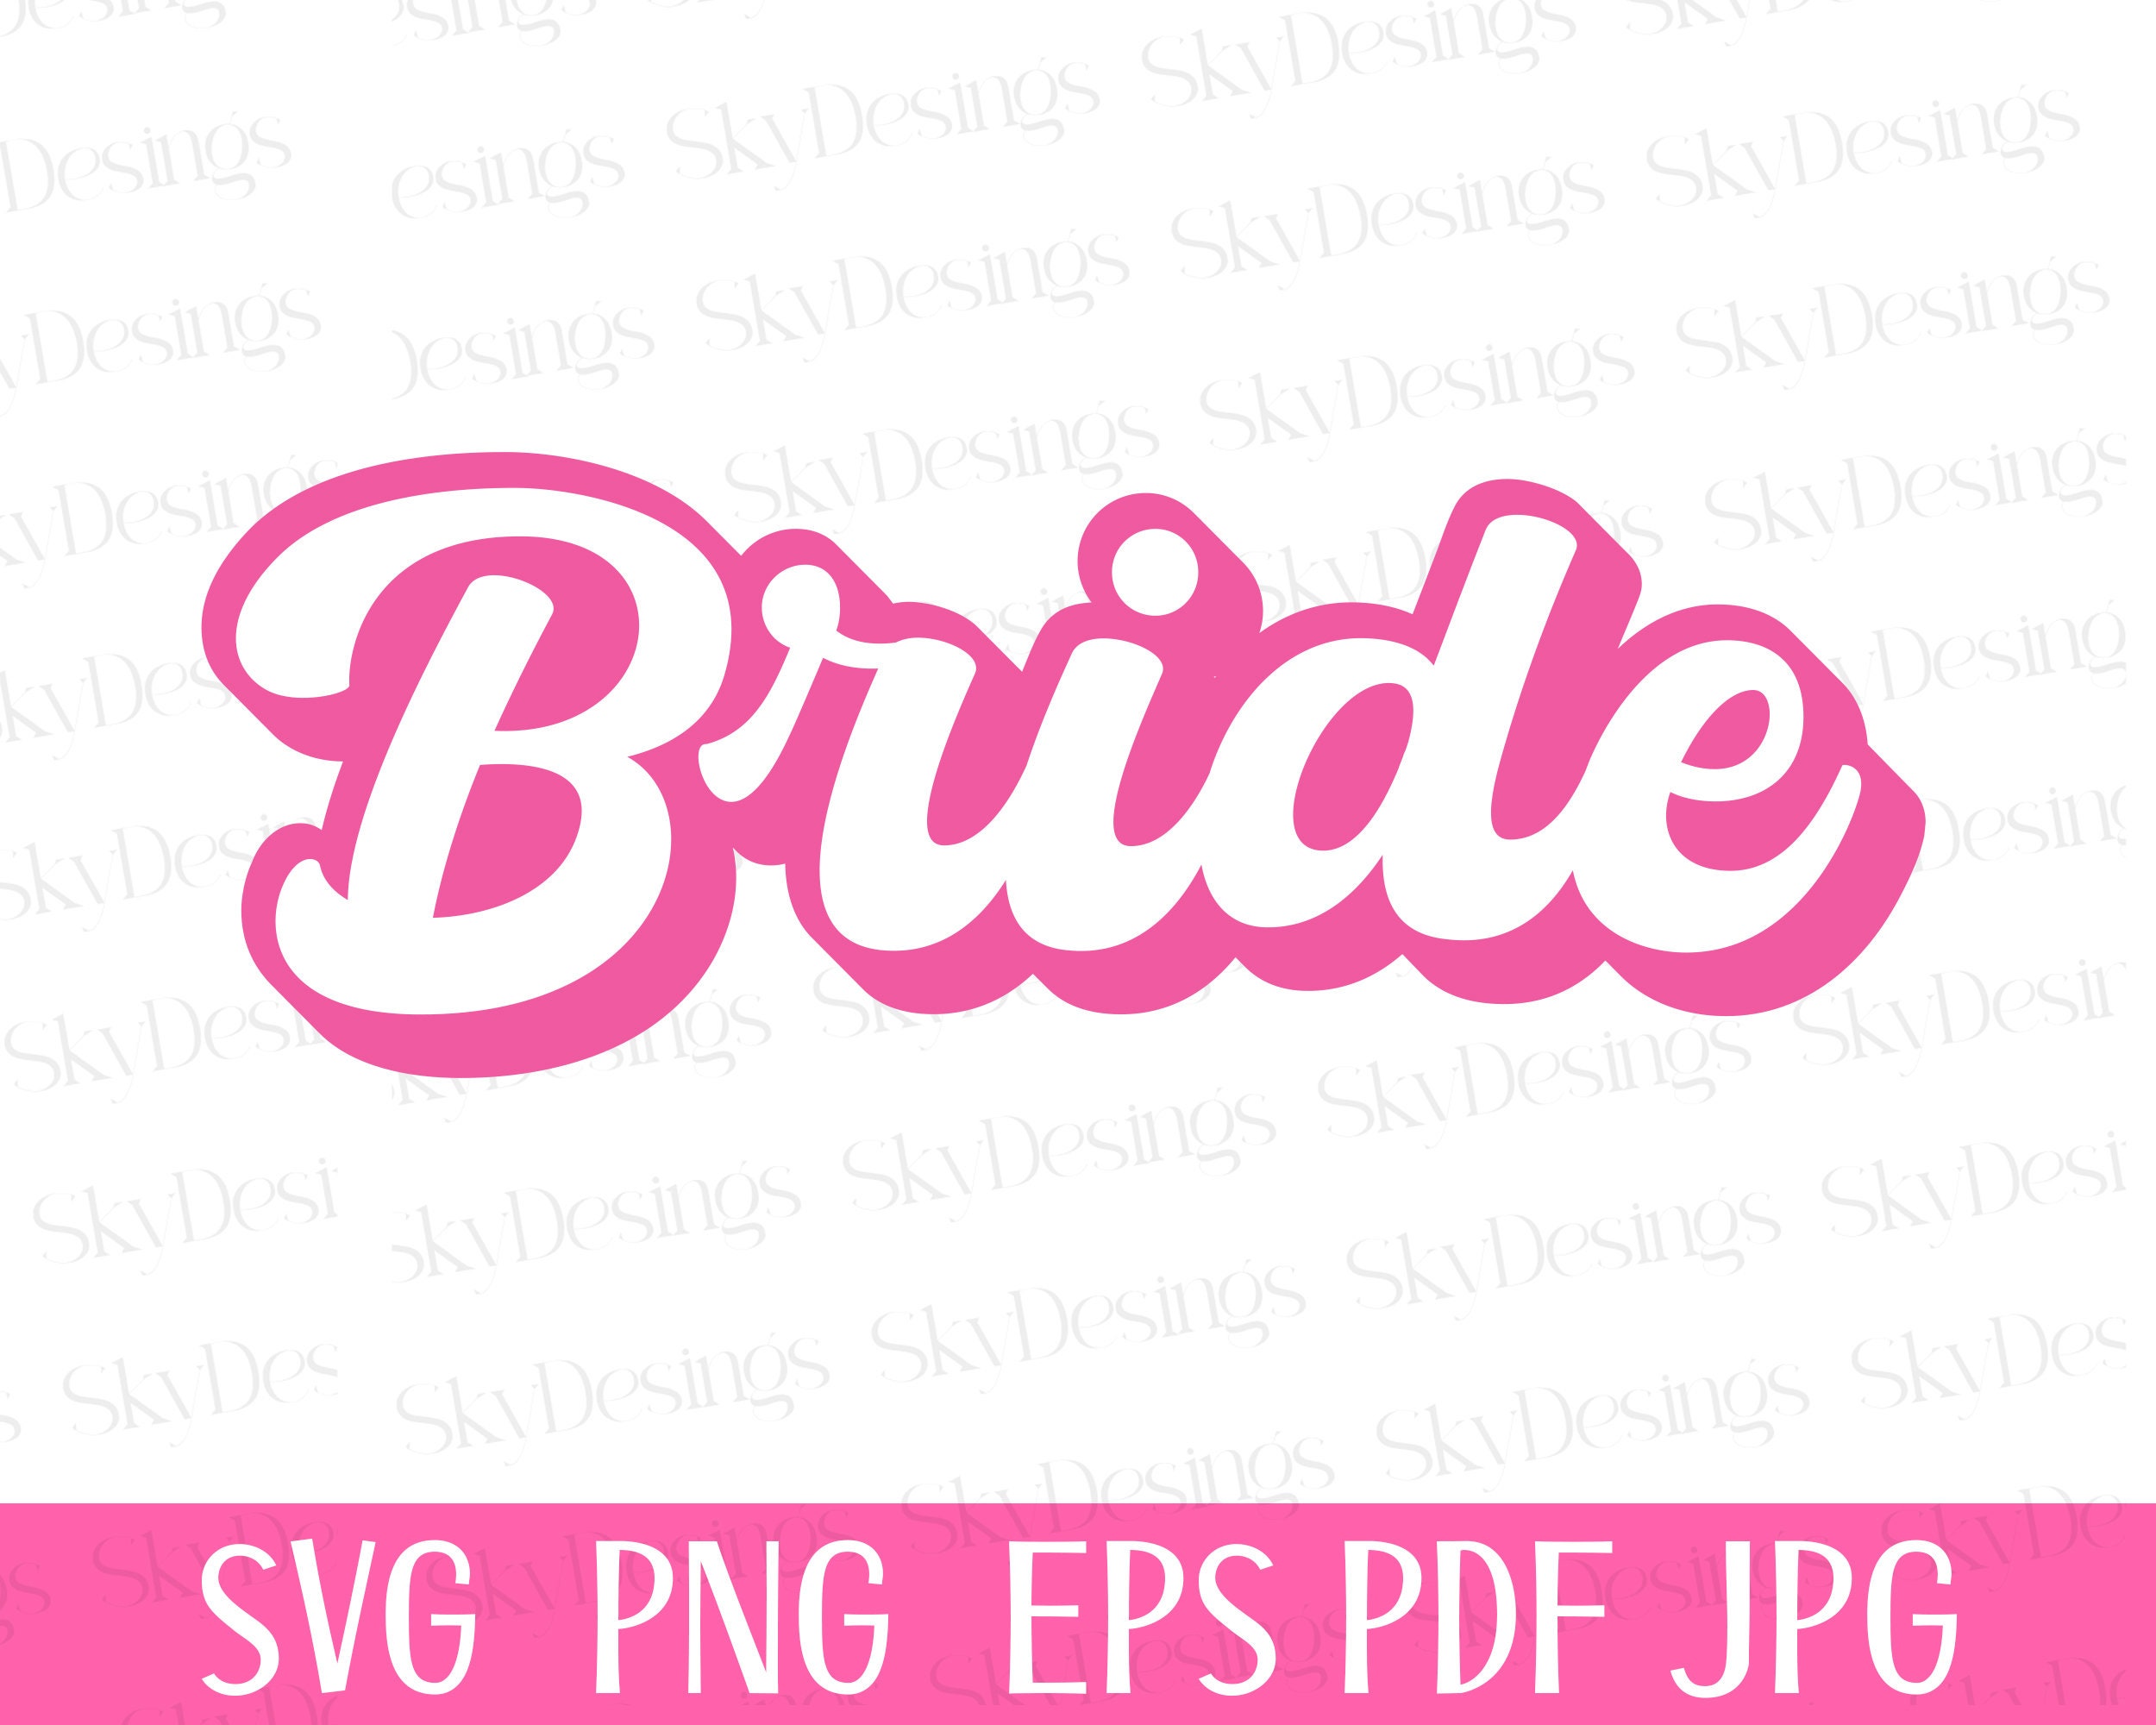 Bride To Be Svg, Marriage Svg, Bridal Party Svg. Vector Cut file for  Cricut, Silhouette, Pdf Png Eps Dxf, Decal, Sticker, Vinyl, Pin